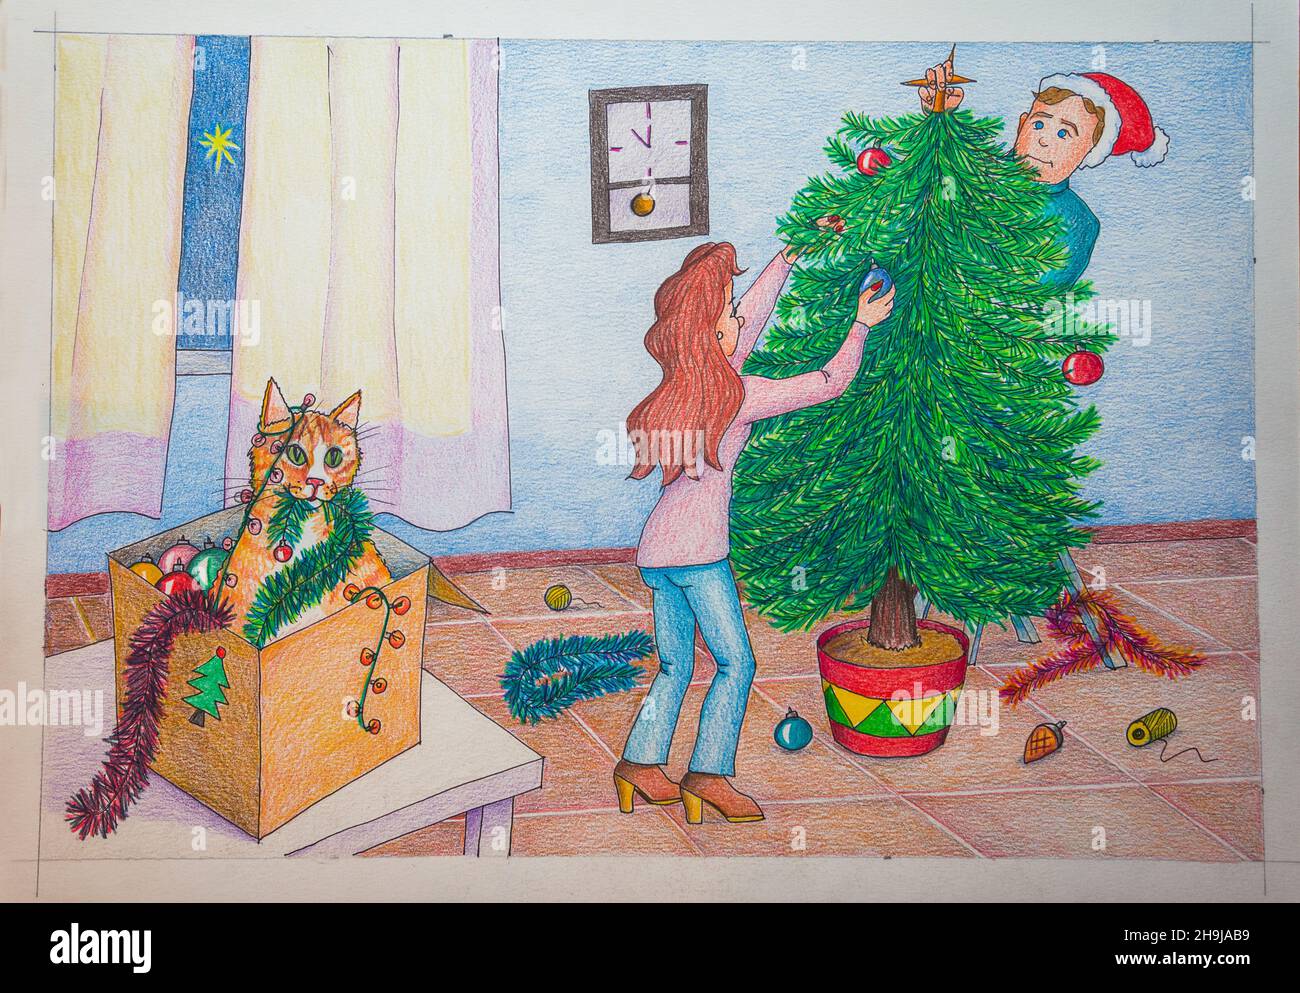 Couple putting the Christmas tree and cat playing in a box. Illustration. Stock Photo